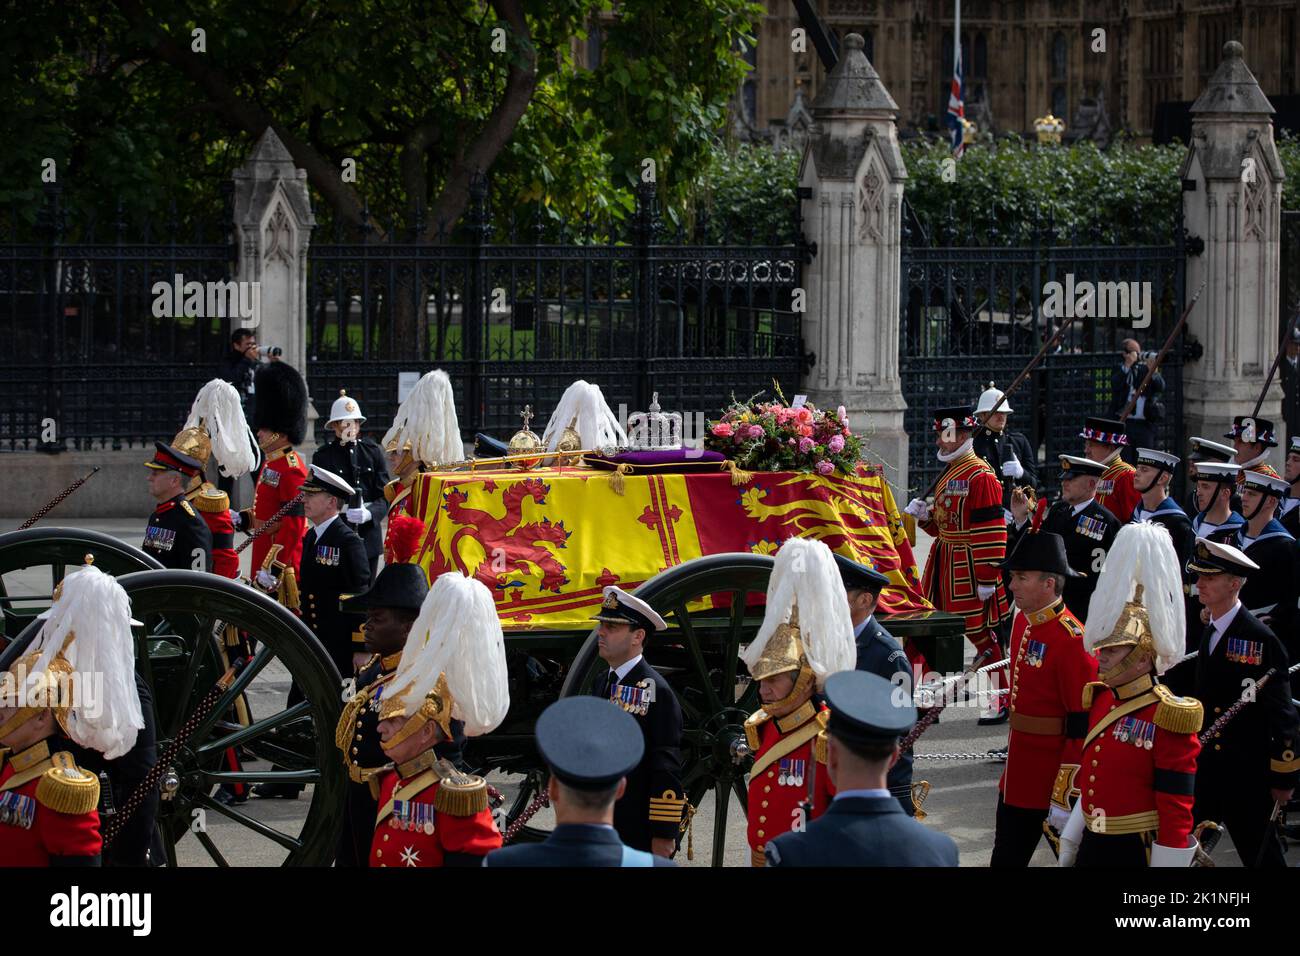 London, England. 19th September, 2022. The coffin of Queen Elizabeth II was carried through London one last time in a procession as part of the monarch's State Funeral.The event was one of the biggest the country has ever seen. Credit: Kiki Streitberger / Alamy Live News Stock Photo